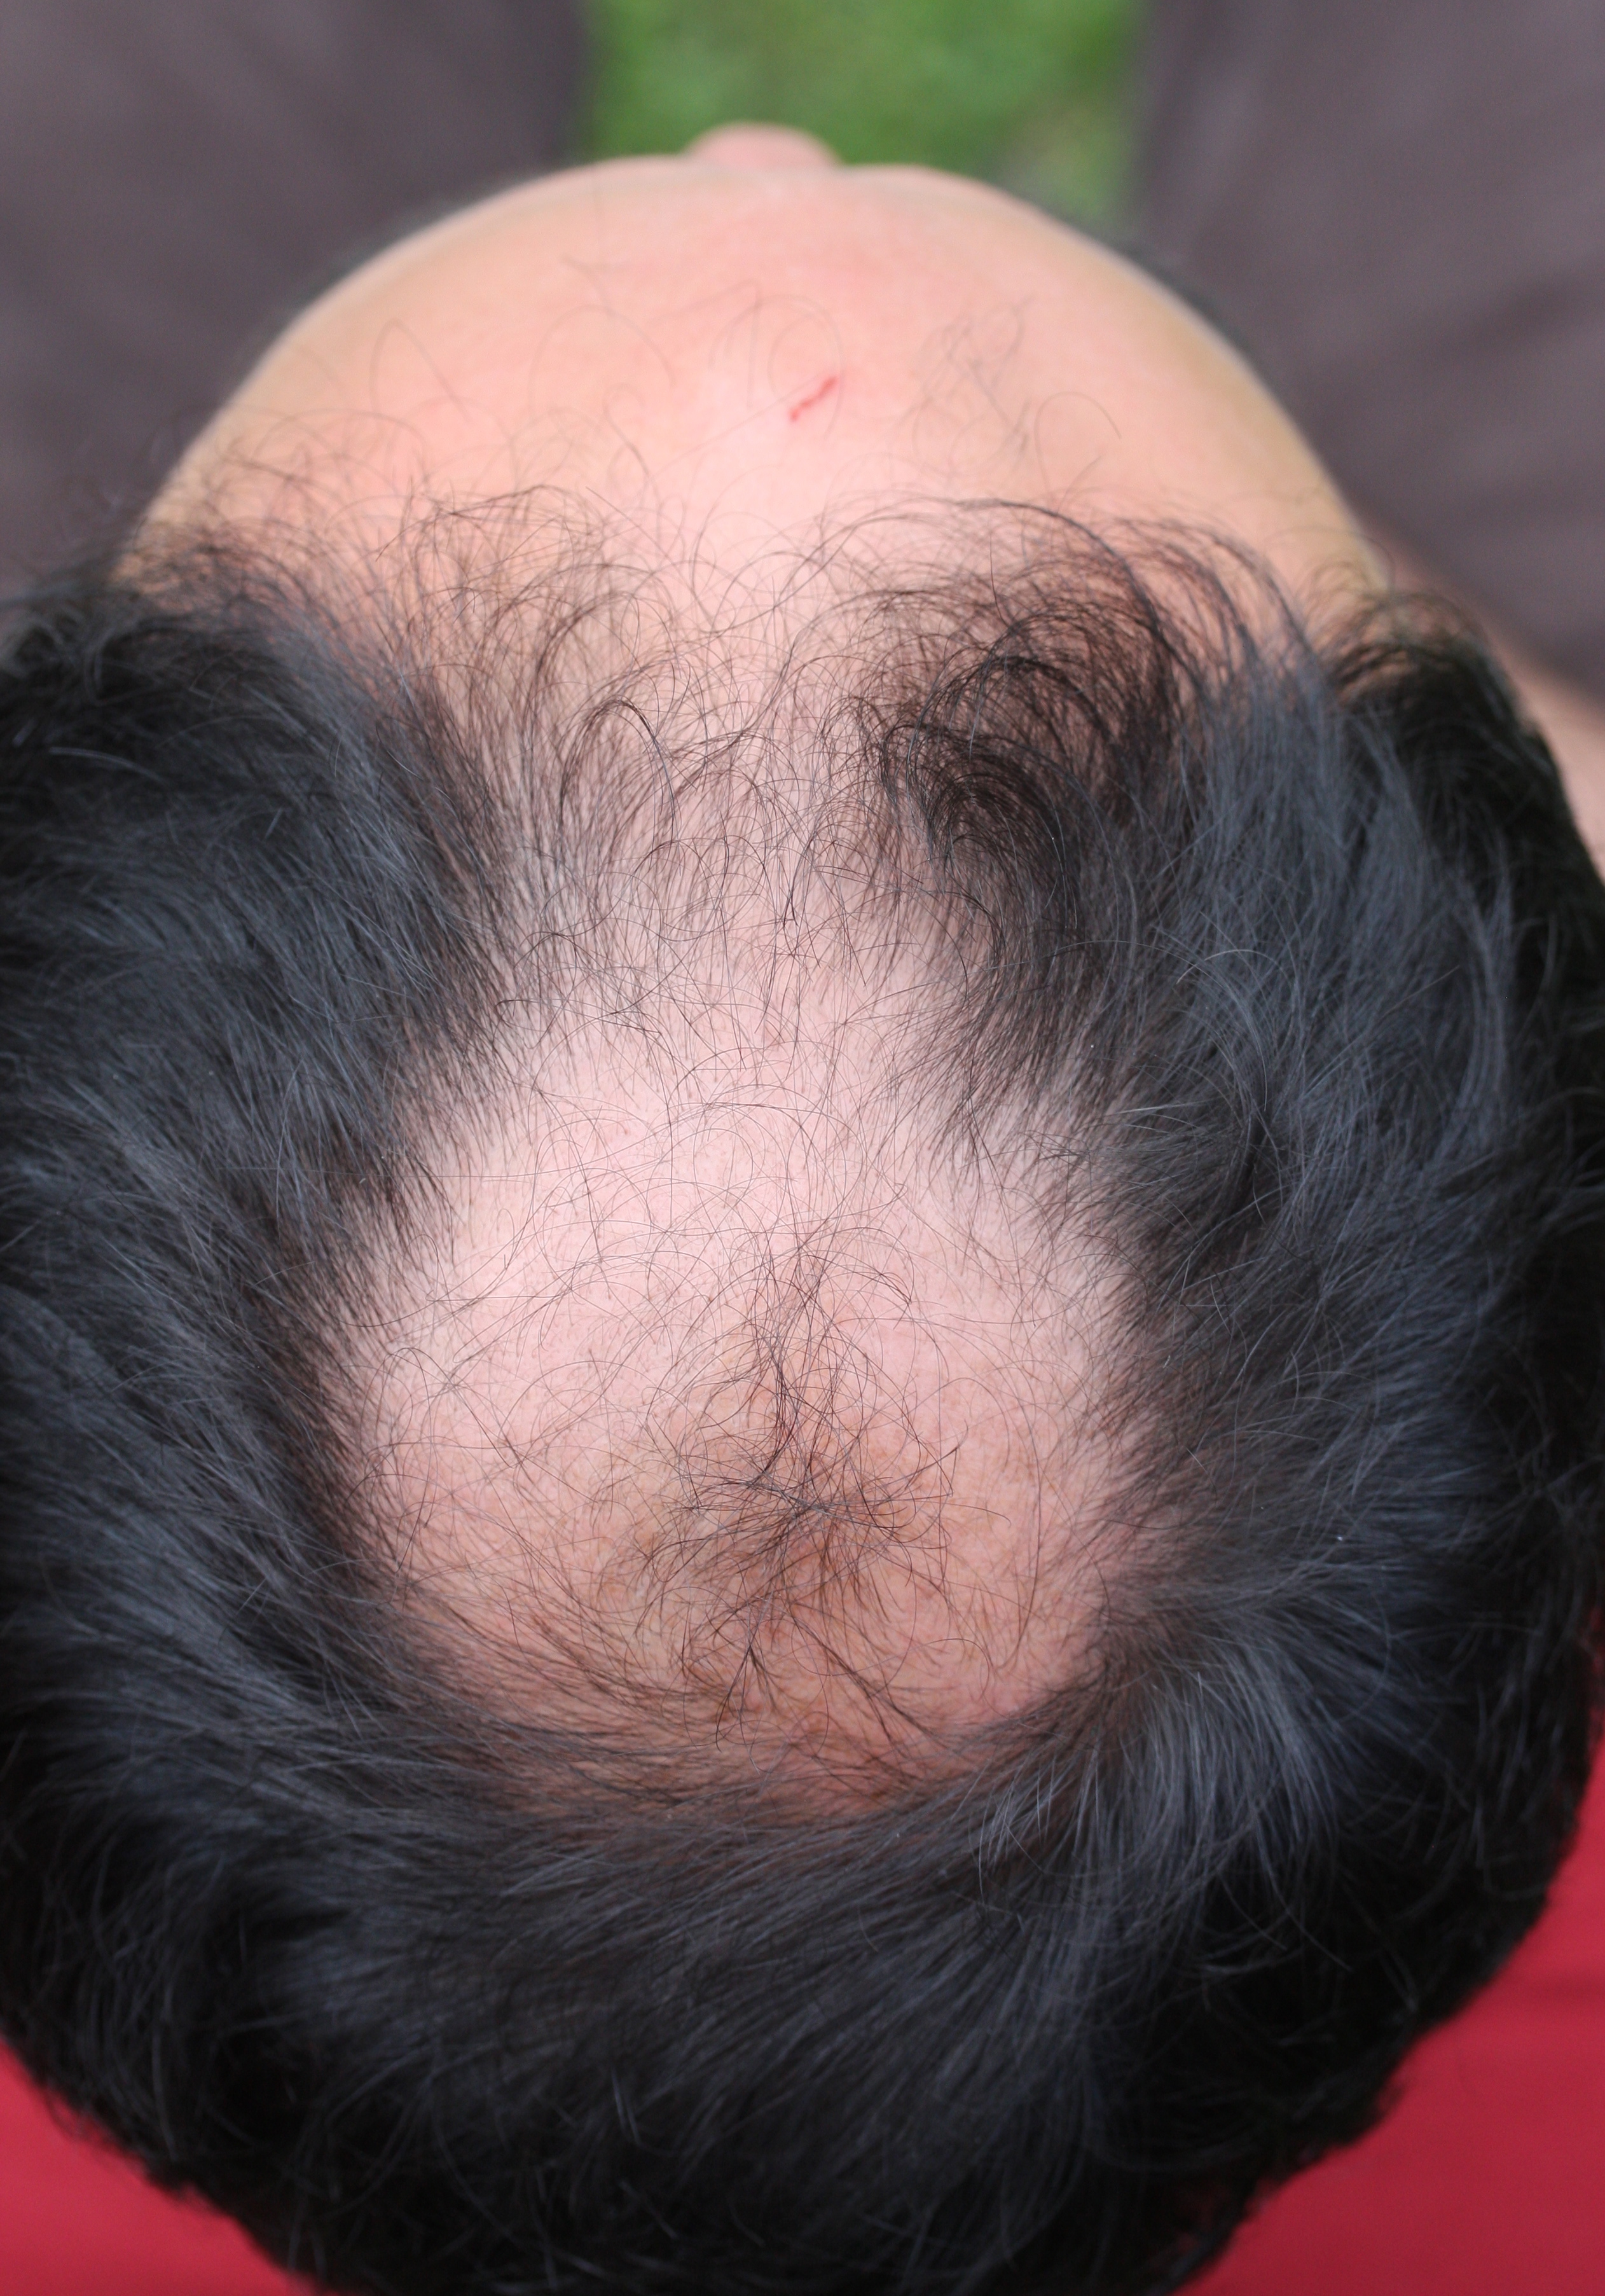 what happens if i use rogaine for frontal baldness